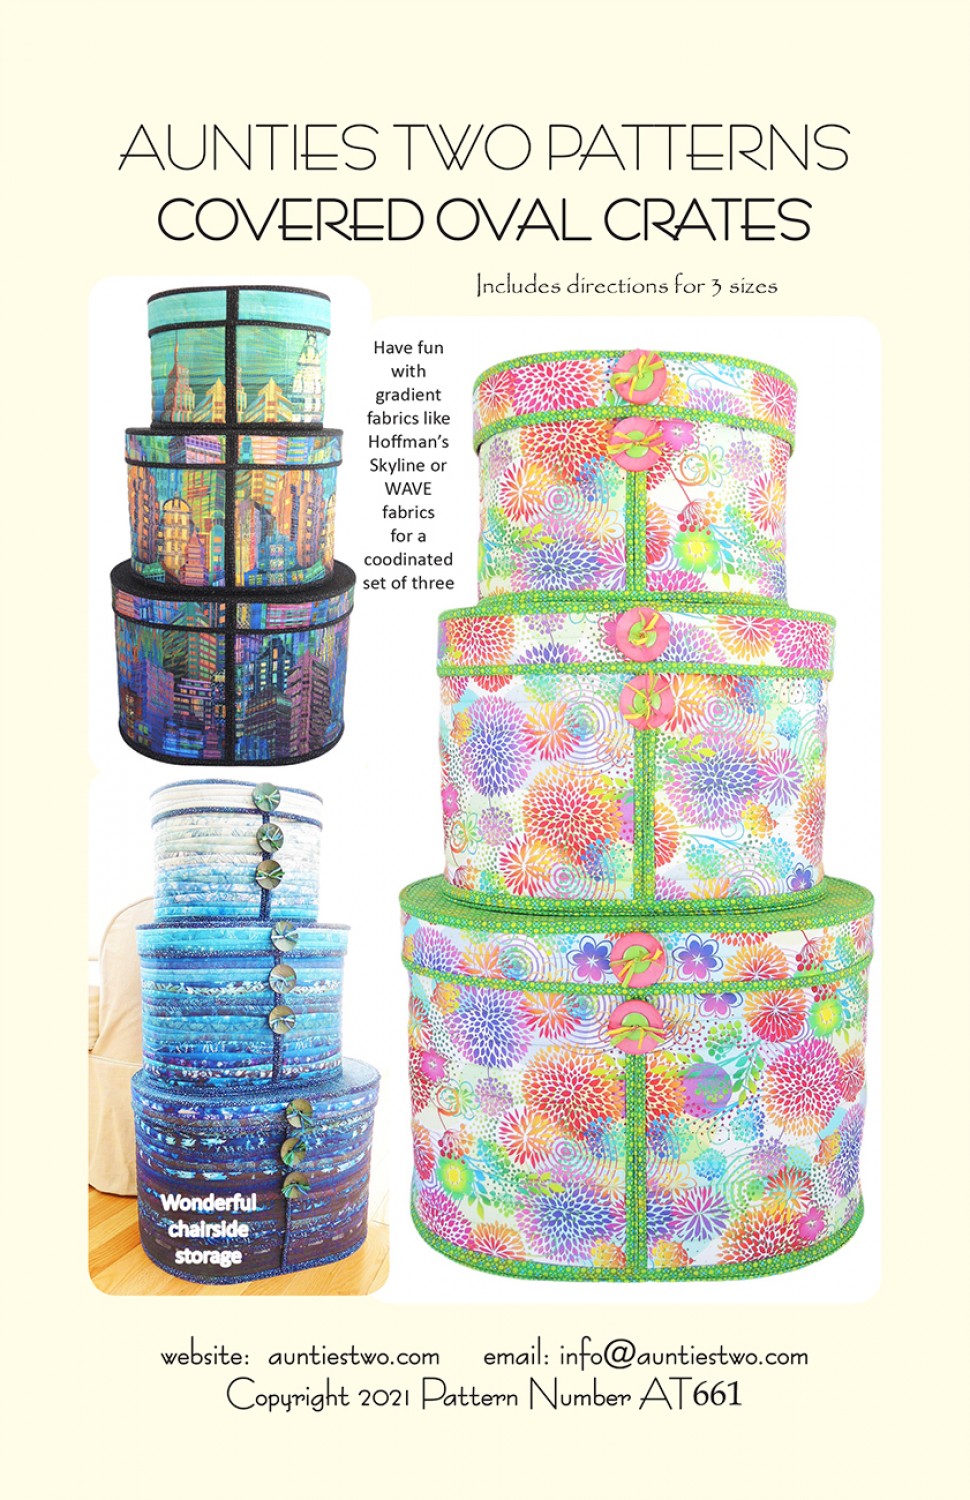 Covered Oval Crates Sewing Pattern from Aunties Two